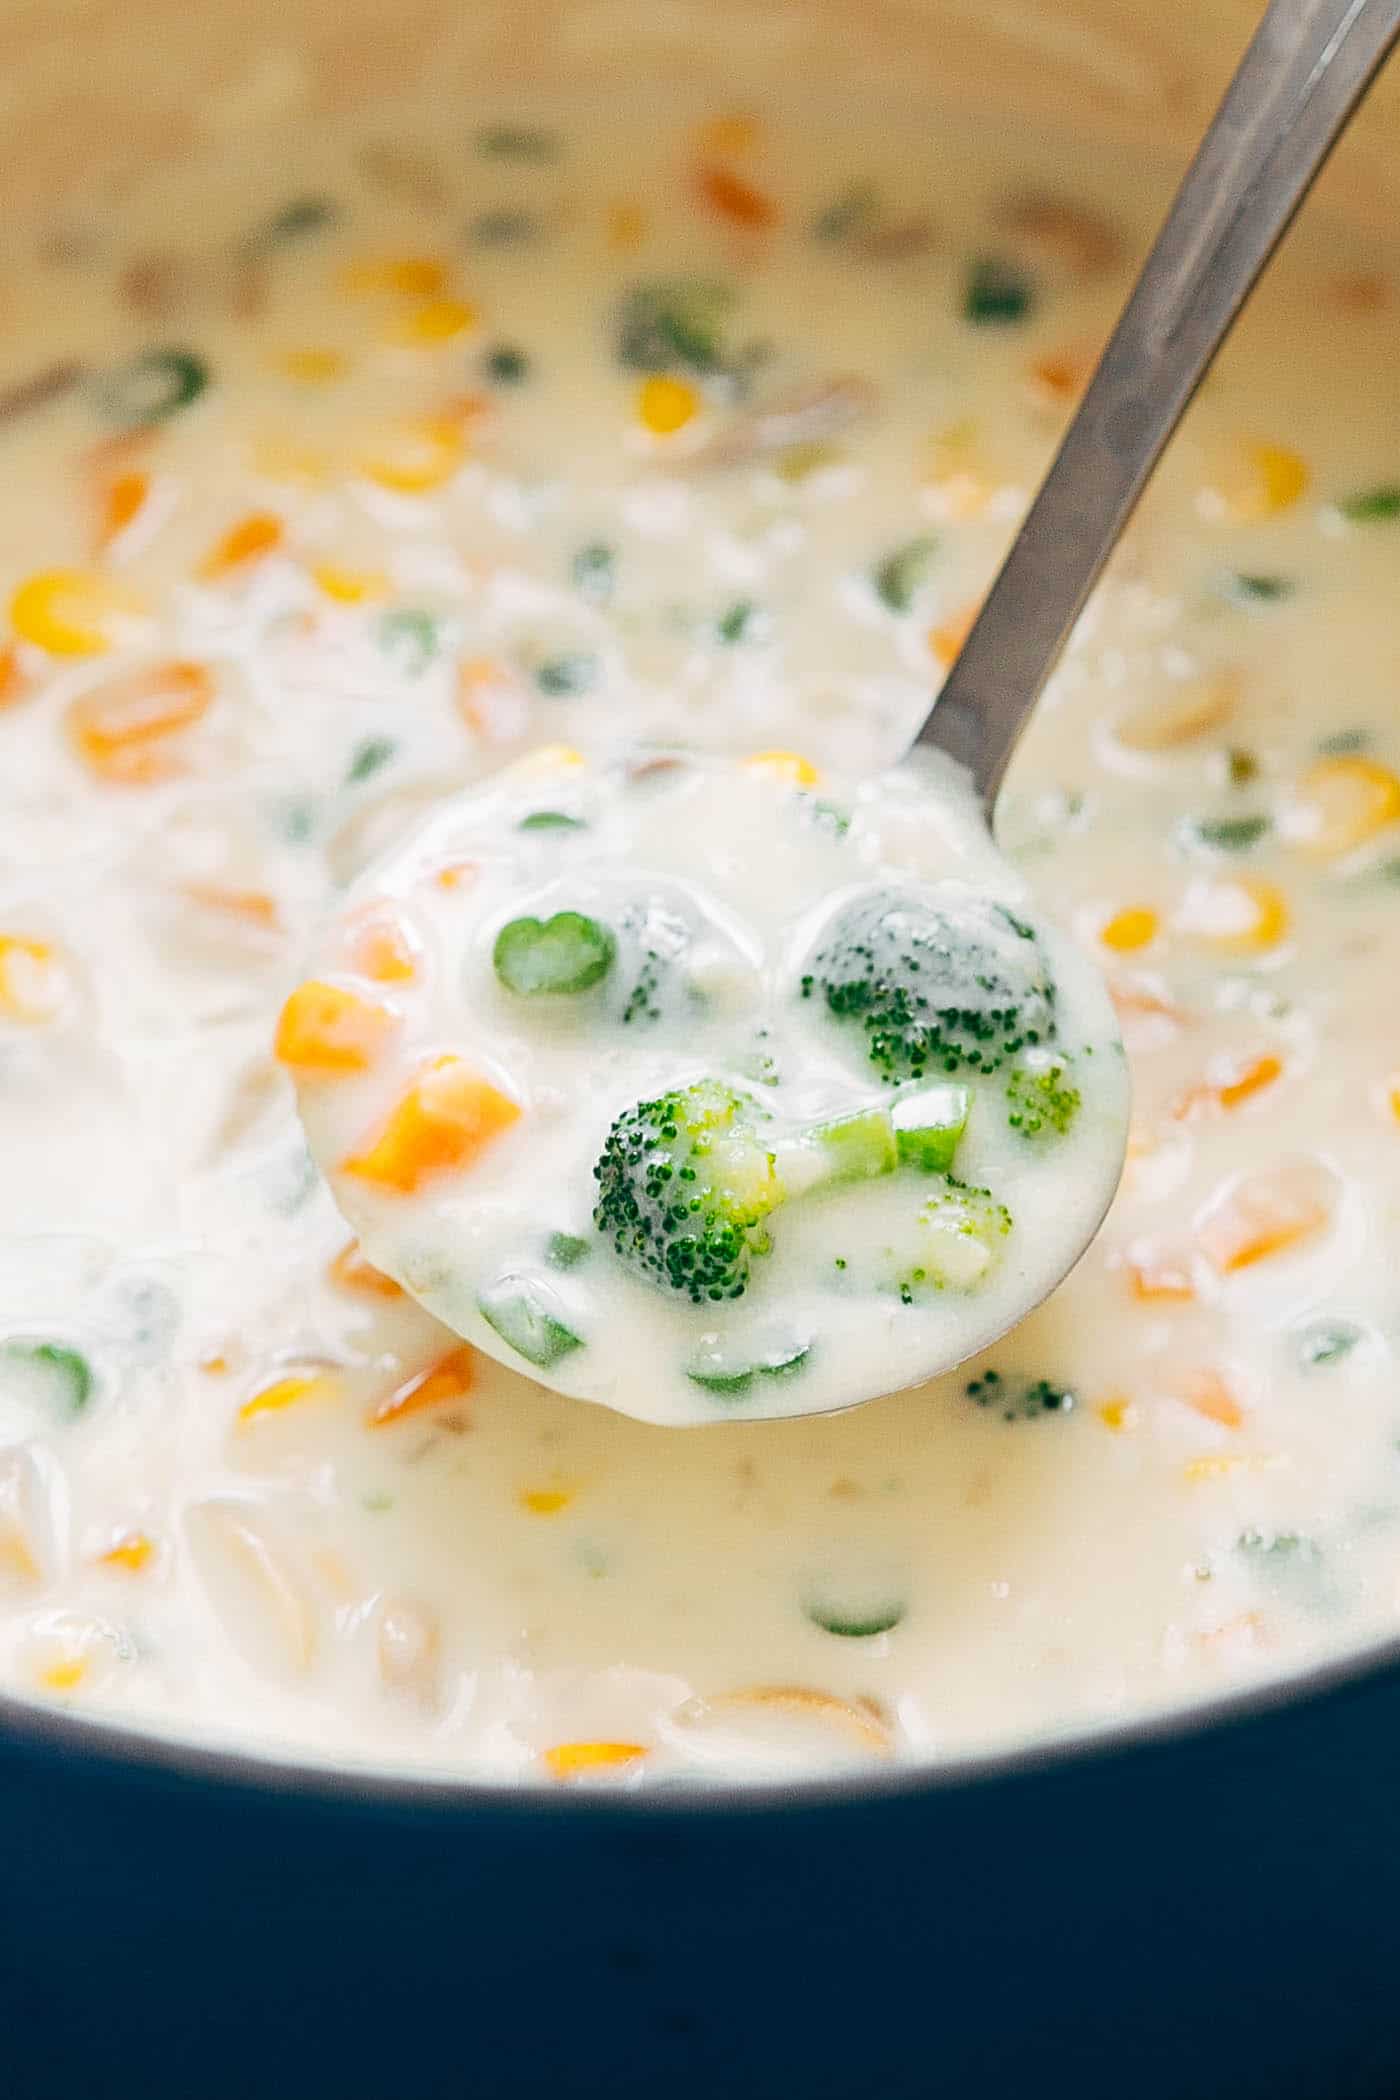 Homemade Creamy Vegetable Soup is an insanely delicious, creamy vegetable soup without any cream. Its perfect if you are looking for a vegetarian meal or just something light and easy.